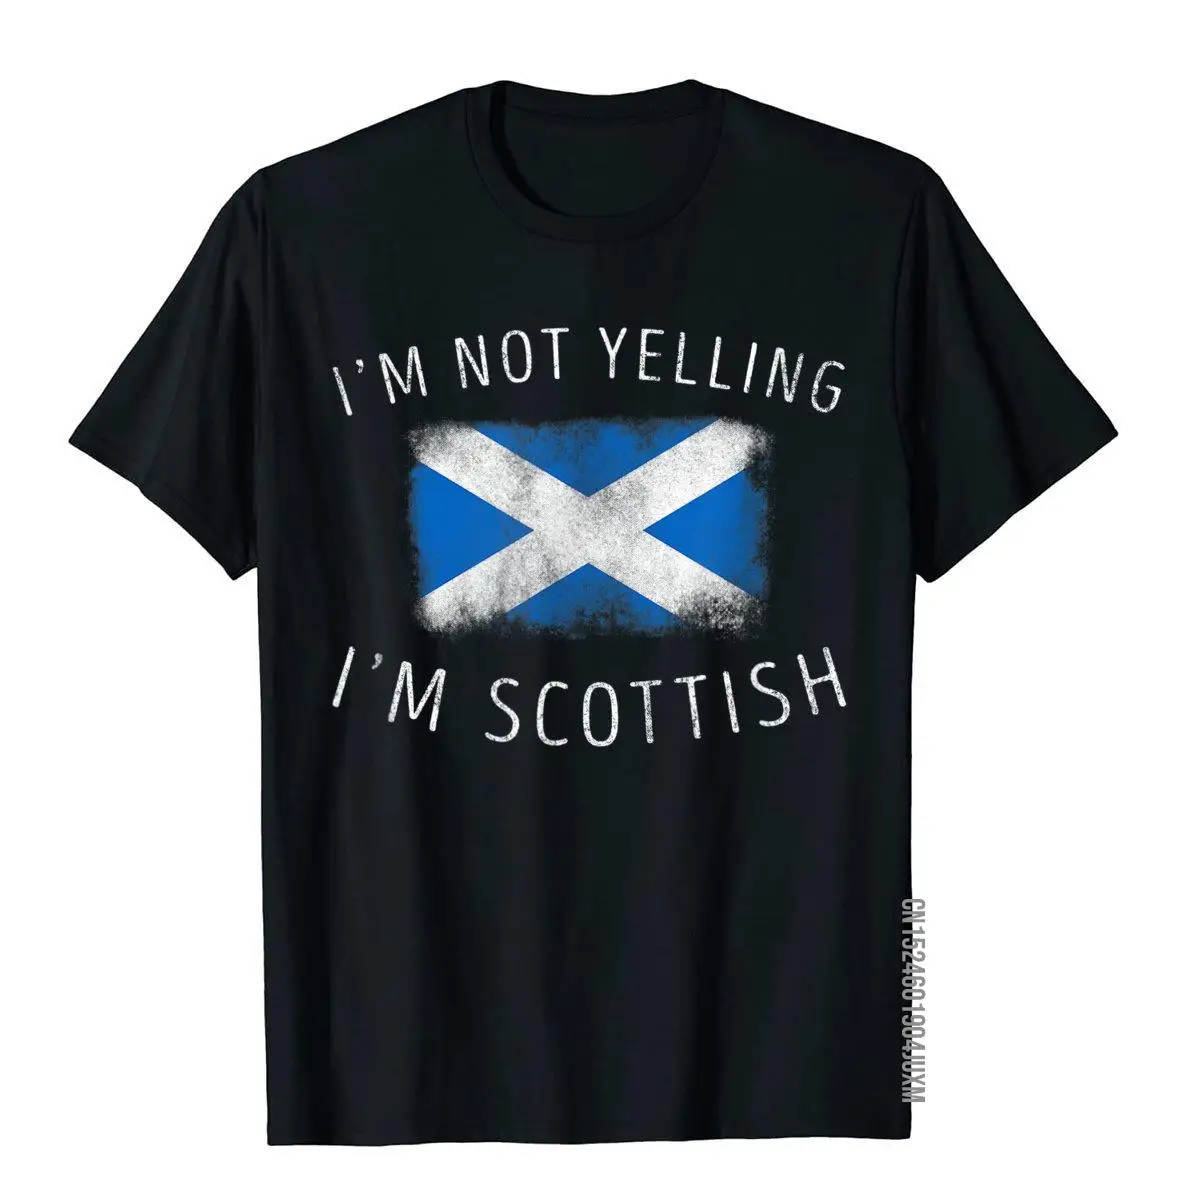 

I'm Not Yelling I'm Scottish Funny Scotland Pride T-Shirt Cotton Tops Shirts For Students High Street T Shirts Crazy Latest